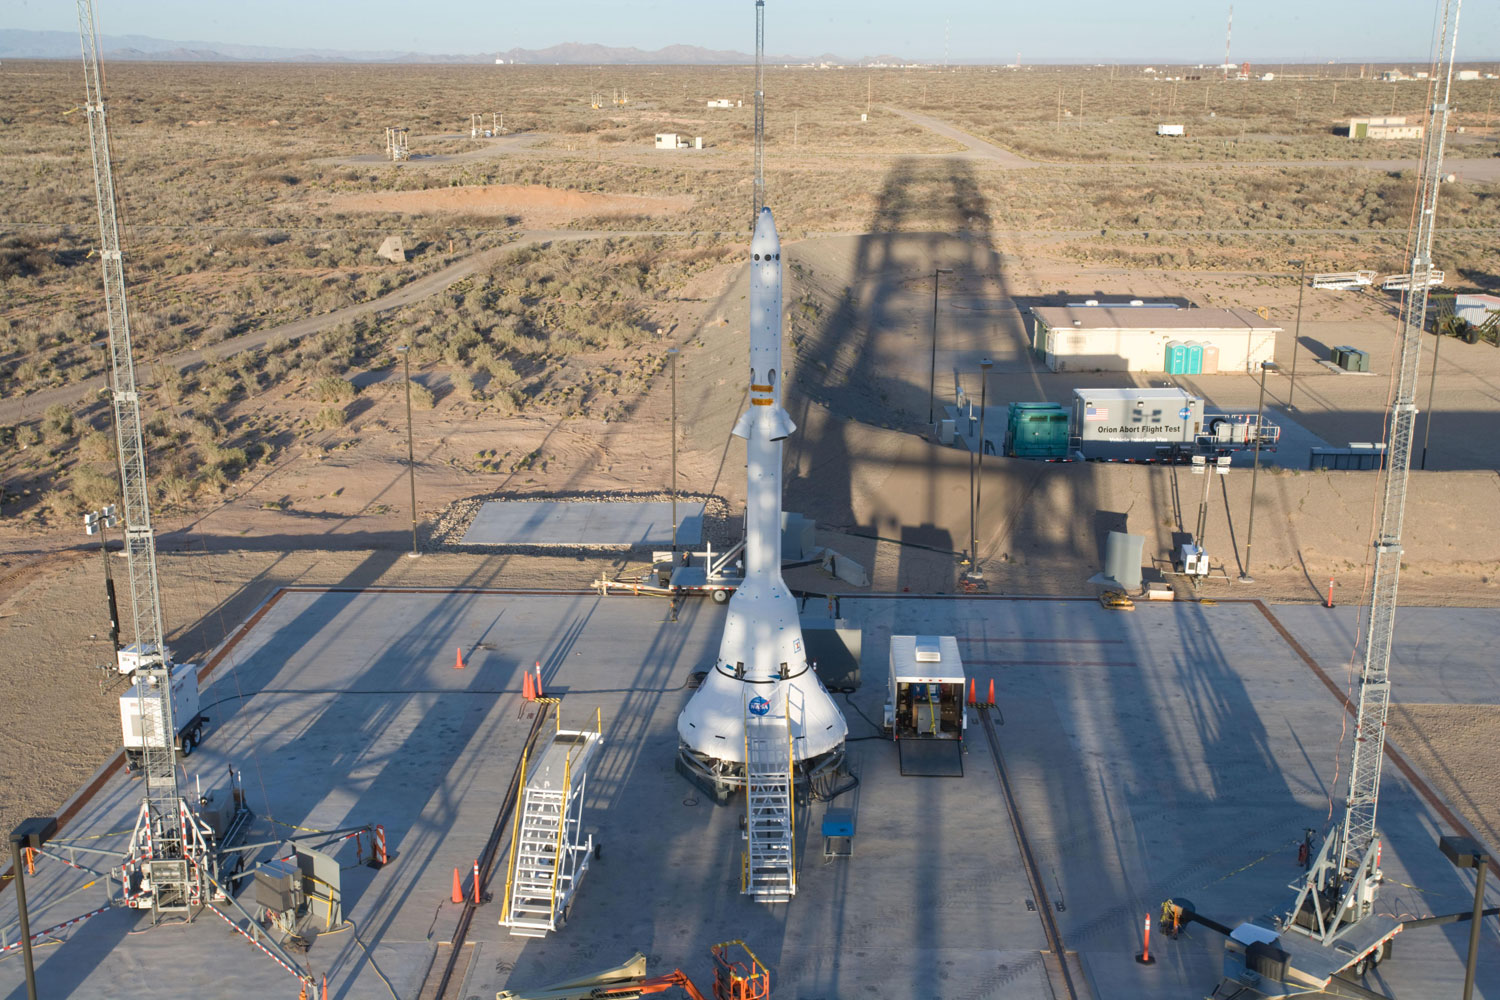 The launch-abort rockets and an Orion mock-up are prepared on the pad for their test flight at the U.S. Army's White Sands Missile Range in New Mexico, on April 8, 2010.